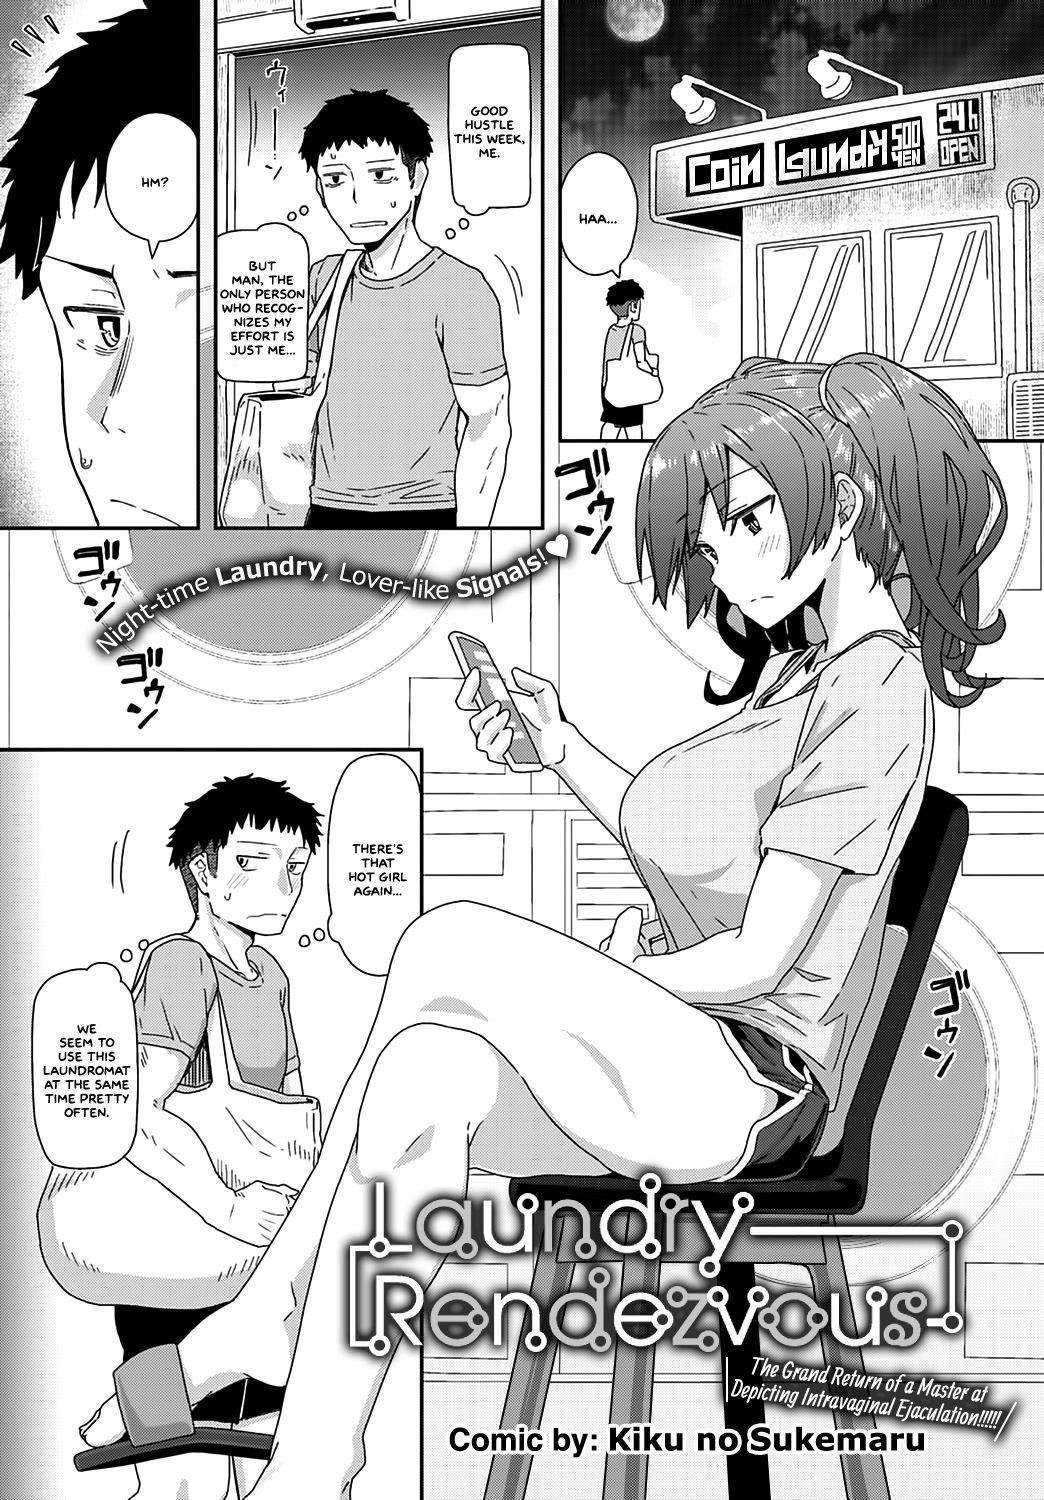 Dicksucking Laundry Rendevous Mexicana - Page 1